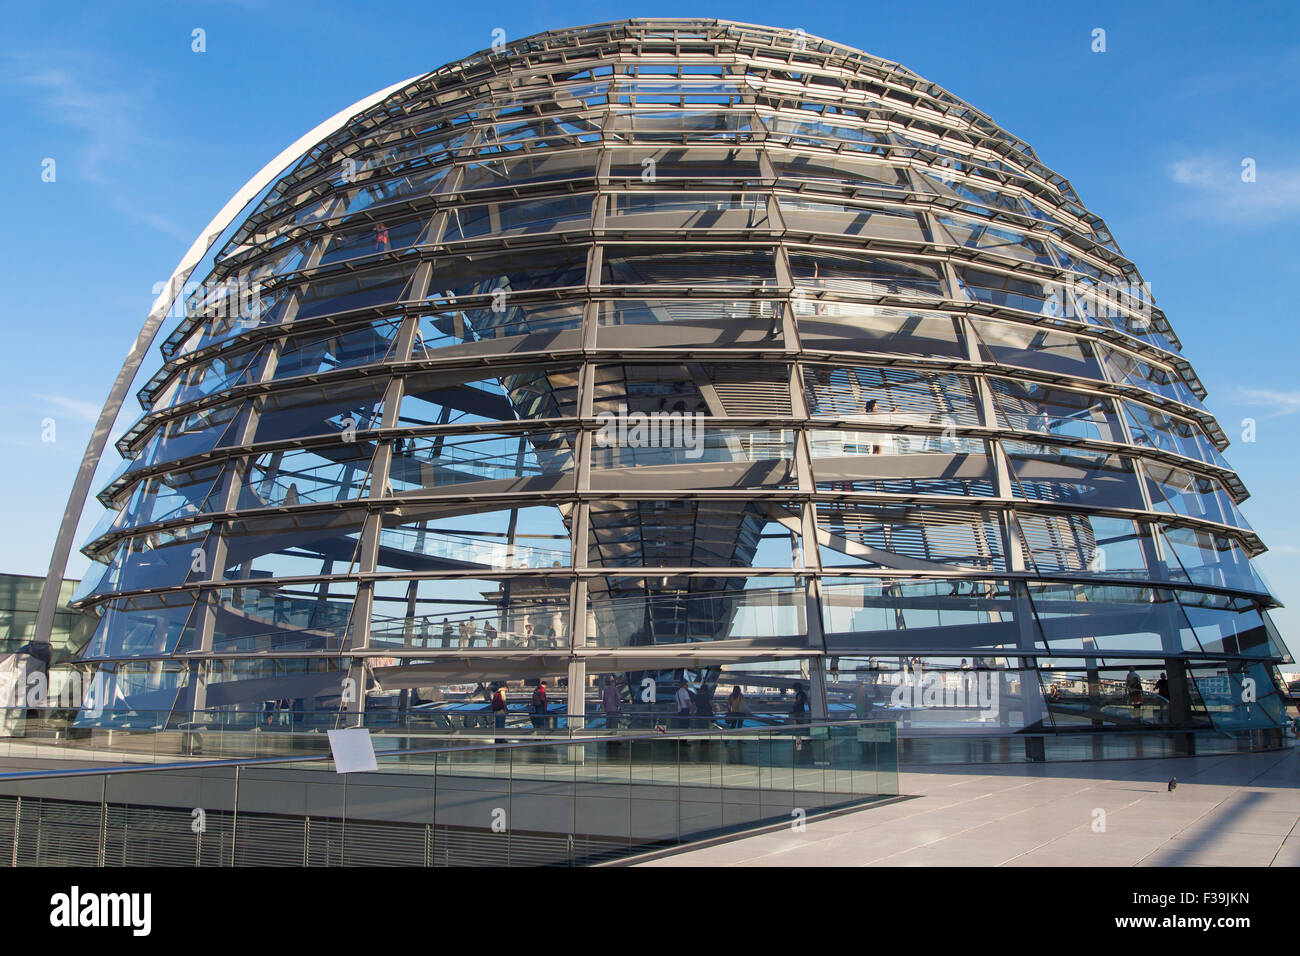 Dome on the top of the Reichstag building in Berlin, Germany. Stock Photo